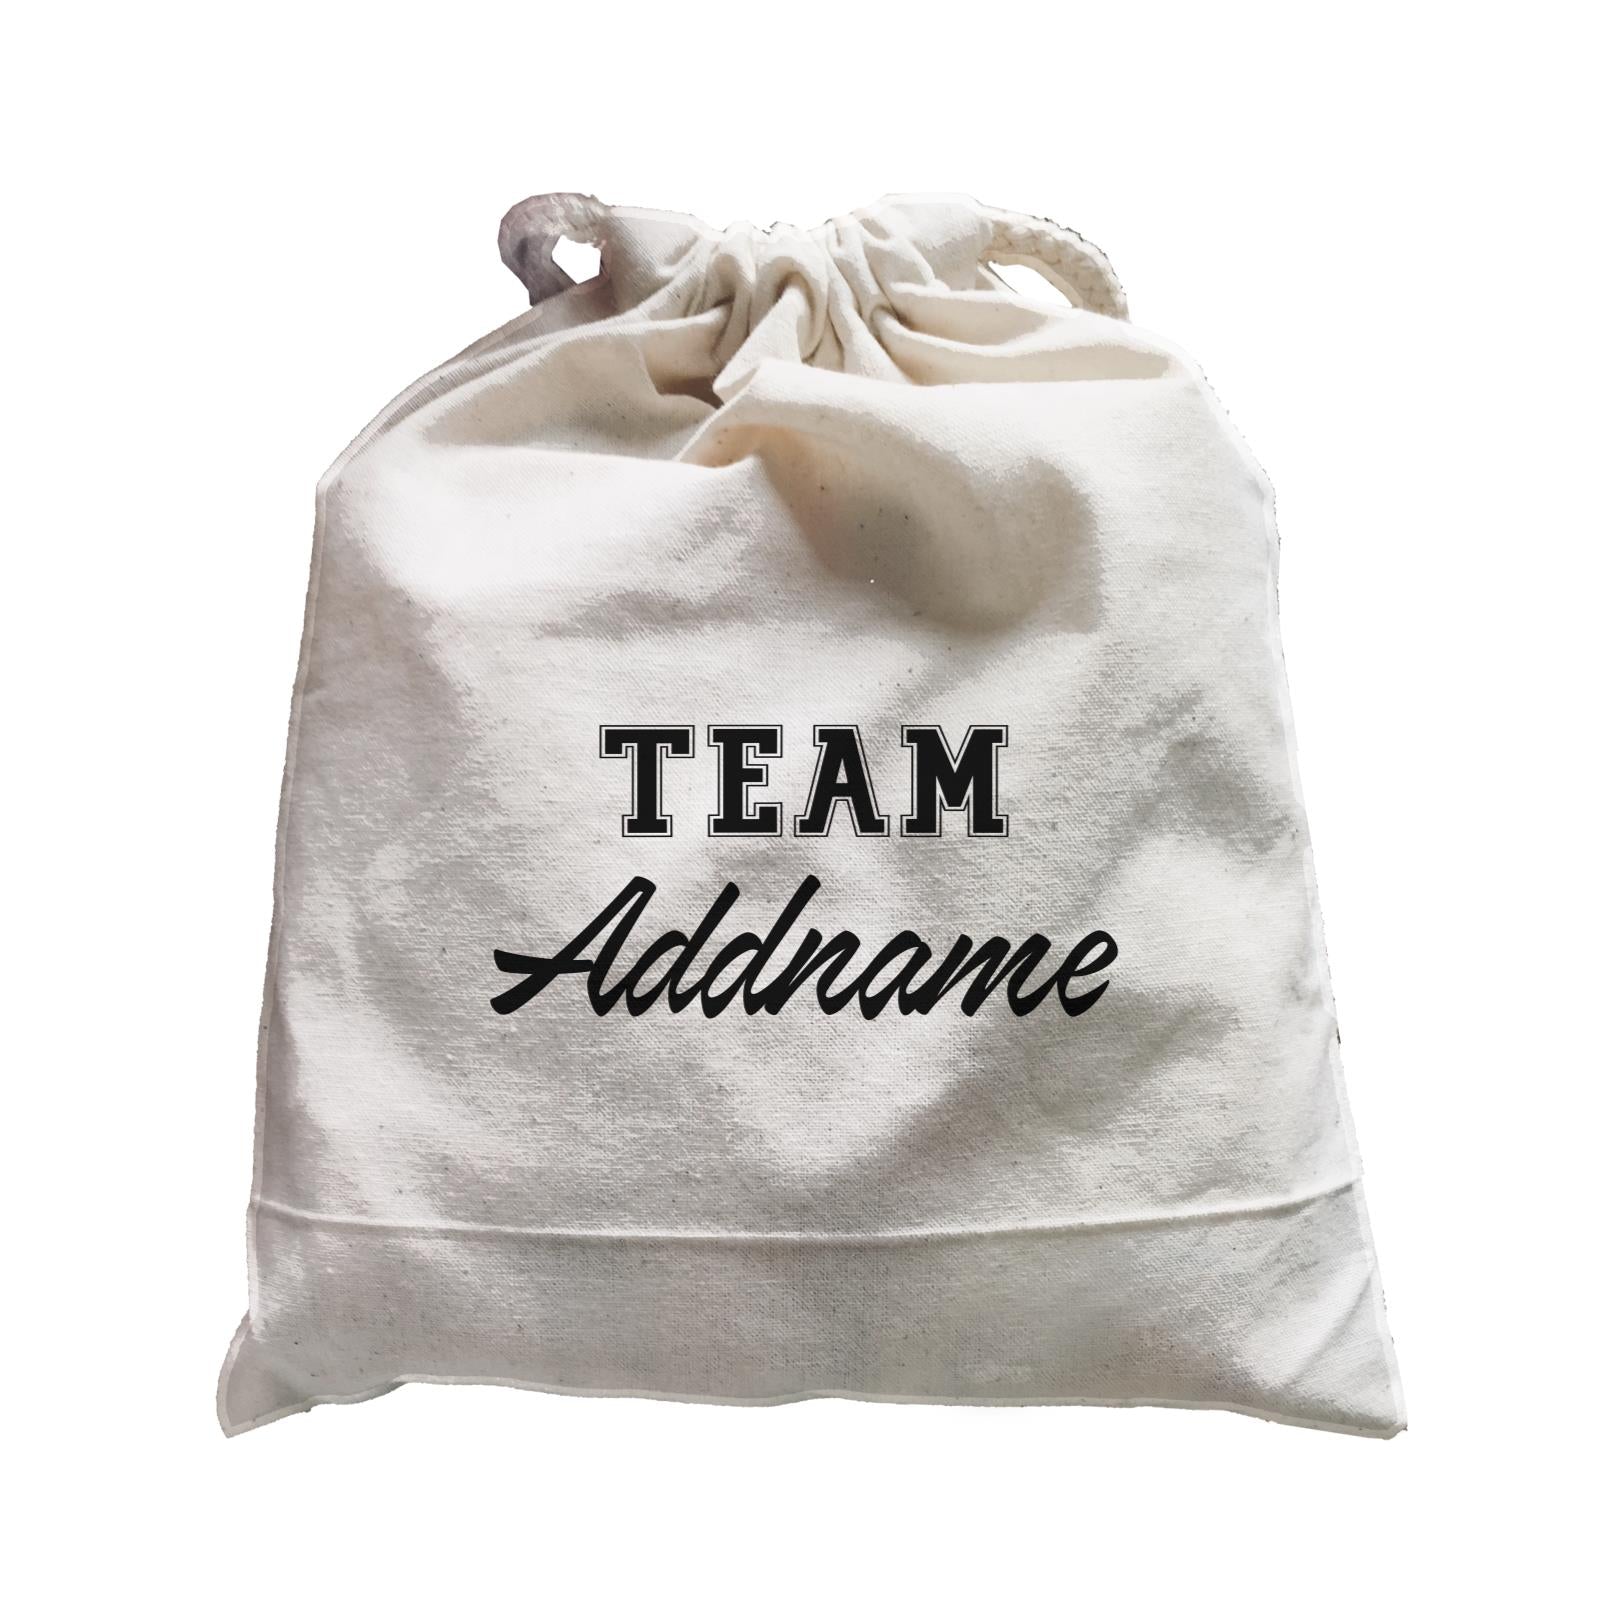 Team Family Addname Accessories Satchel